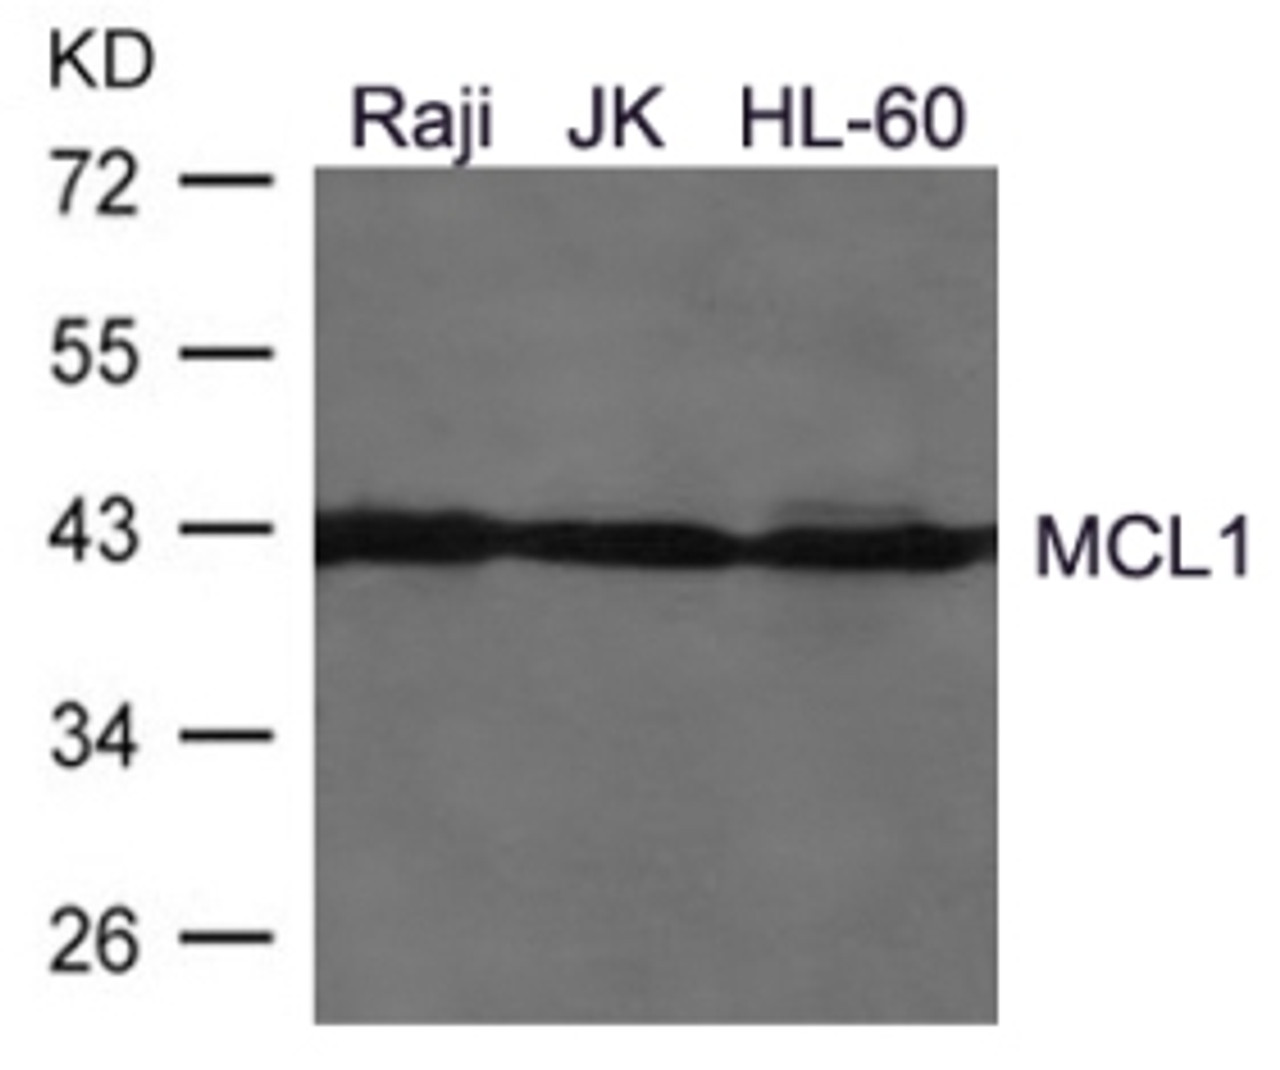 Western blot analysis of lysed extracts from Raji, JK, HL-60 cells using MCL1 Antibody.